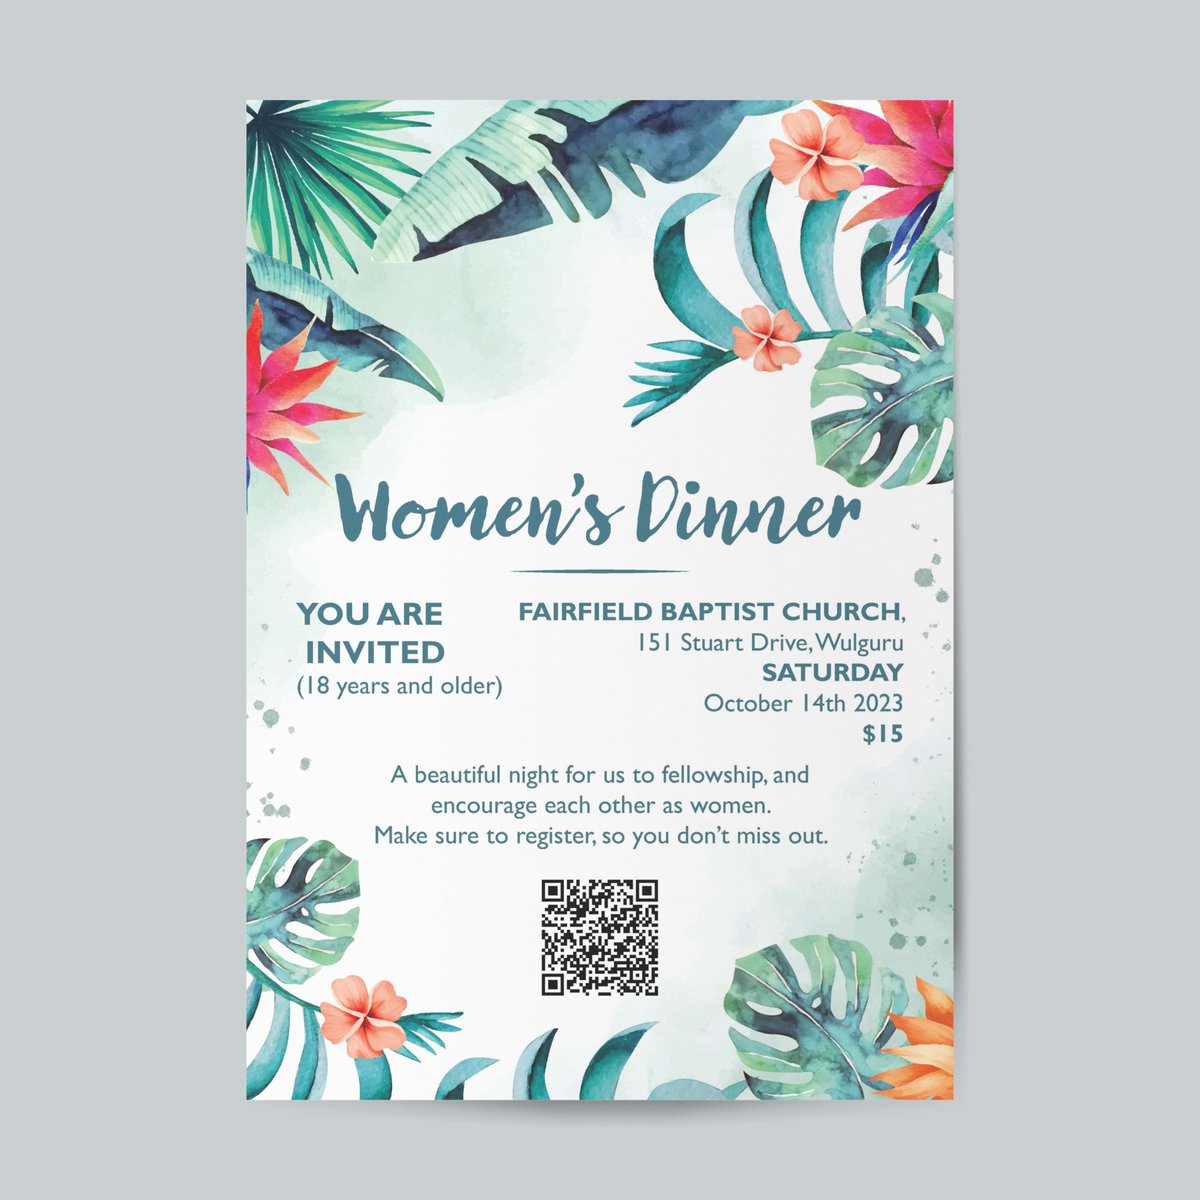 Poster perfection! Check out this design I created for this years Women's Dinner. What a wonderful tropically themed event it was! #GraphicDesignMagic #DesignInspiration #VisualArtistry'